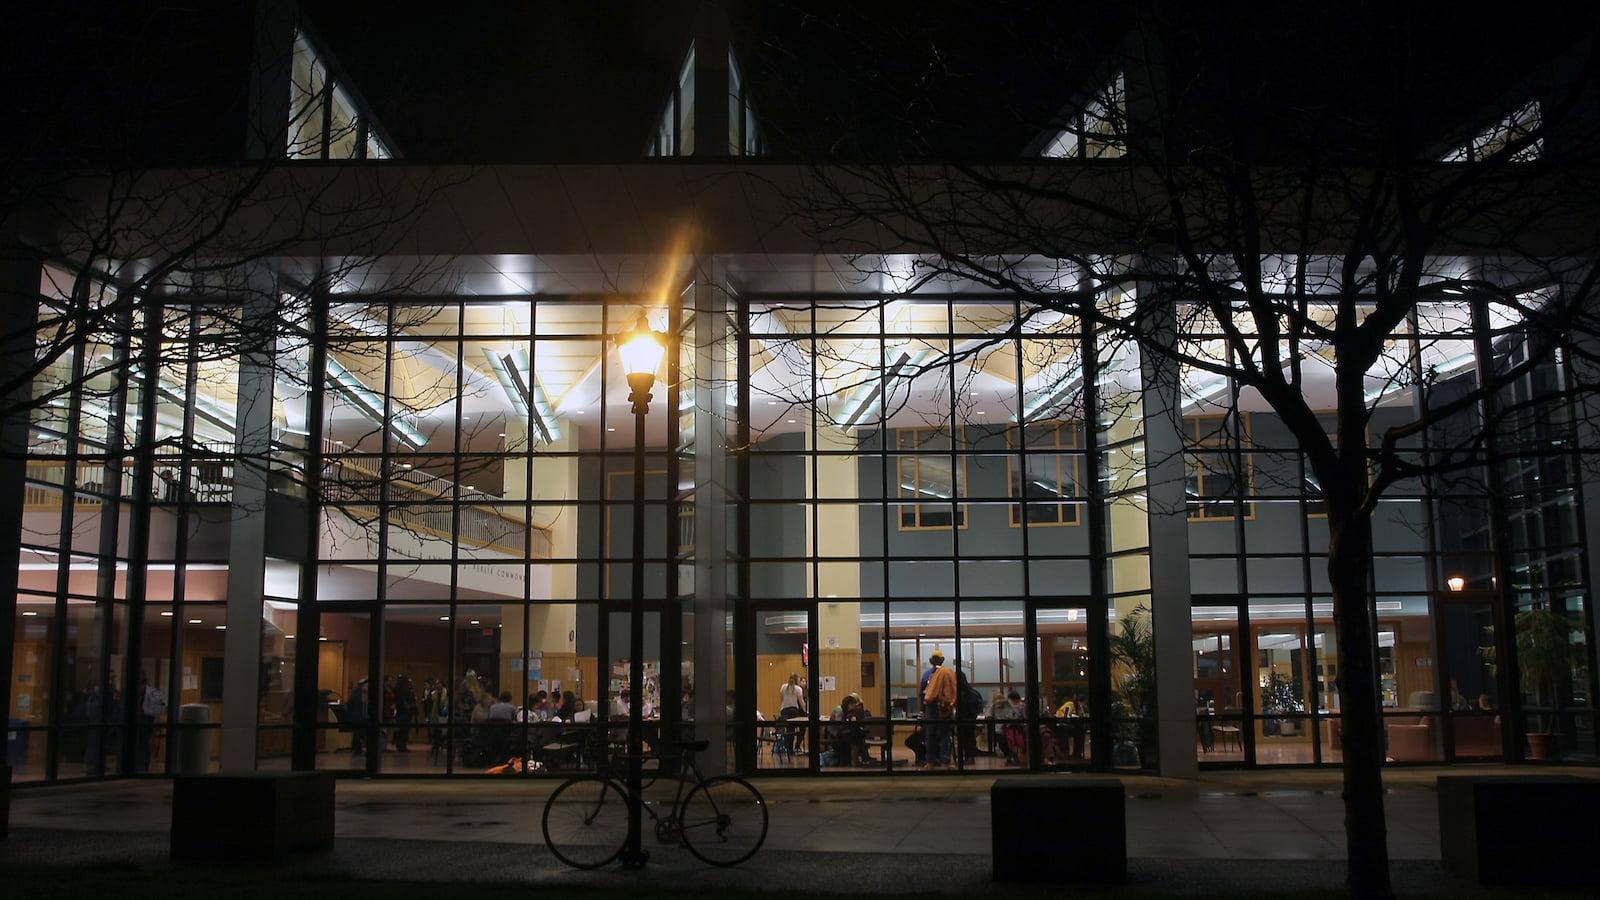 Students studying in the Science Center atrium at night.